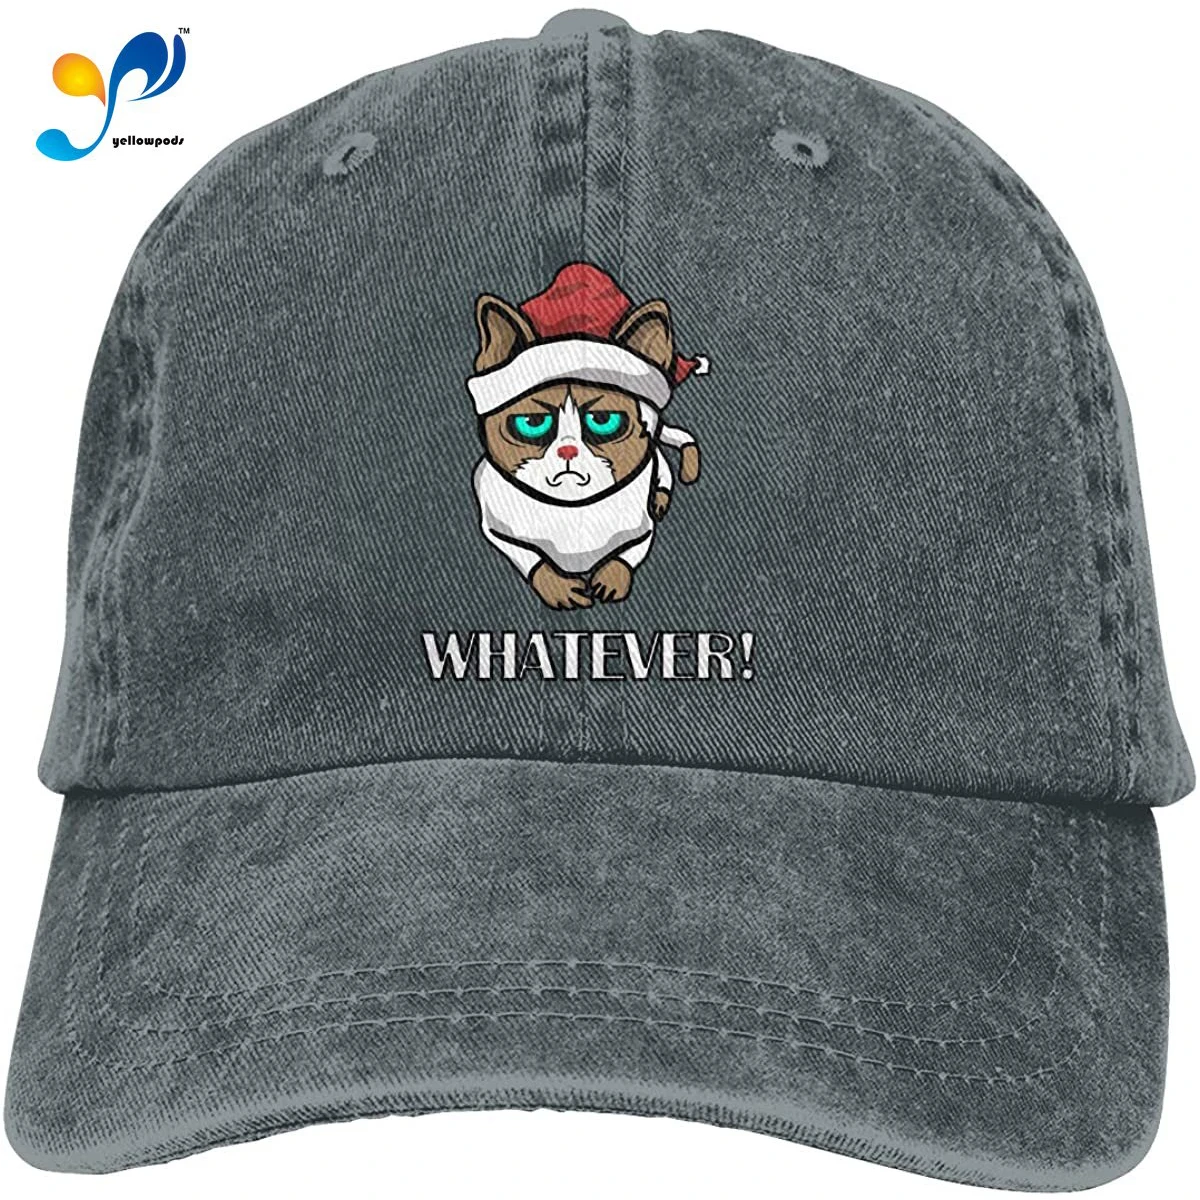 

Holiday Cat Whatever Vintage Washed Twill Baseball Caps Adjustable Hats Funny Humor Irony Graphics Of Adult Gift Deep Heather